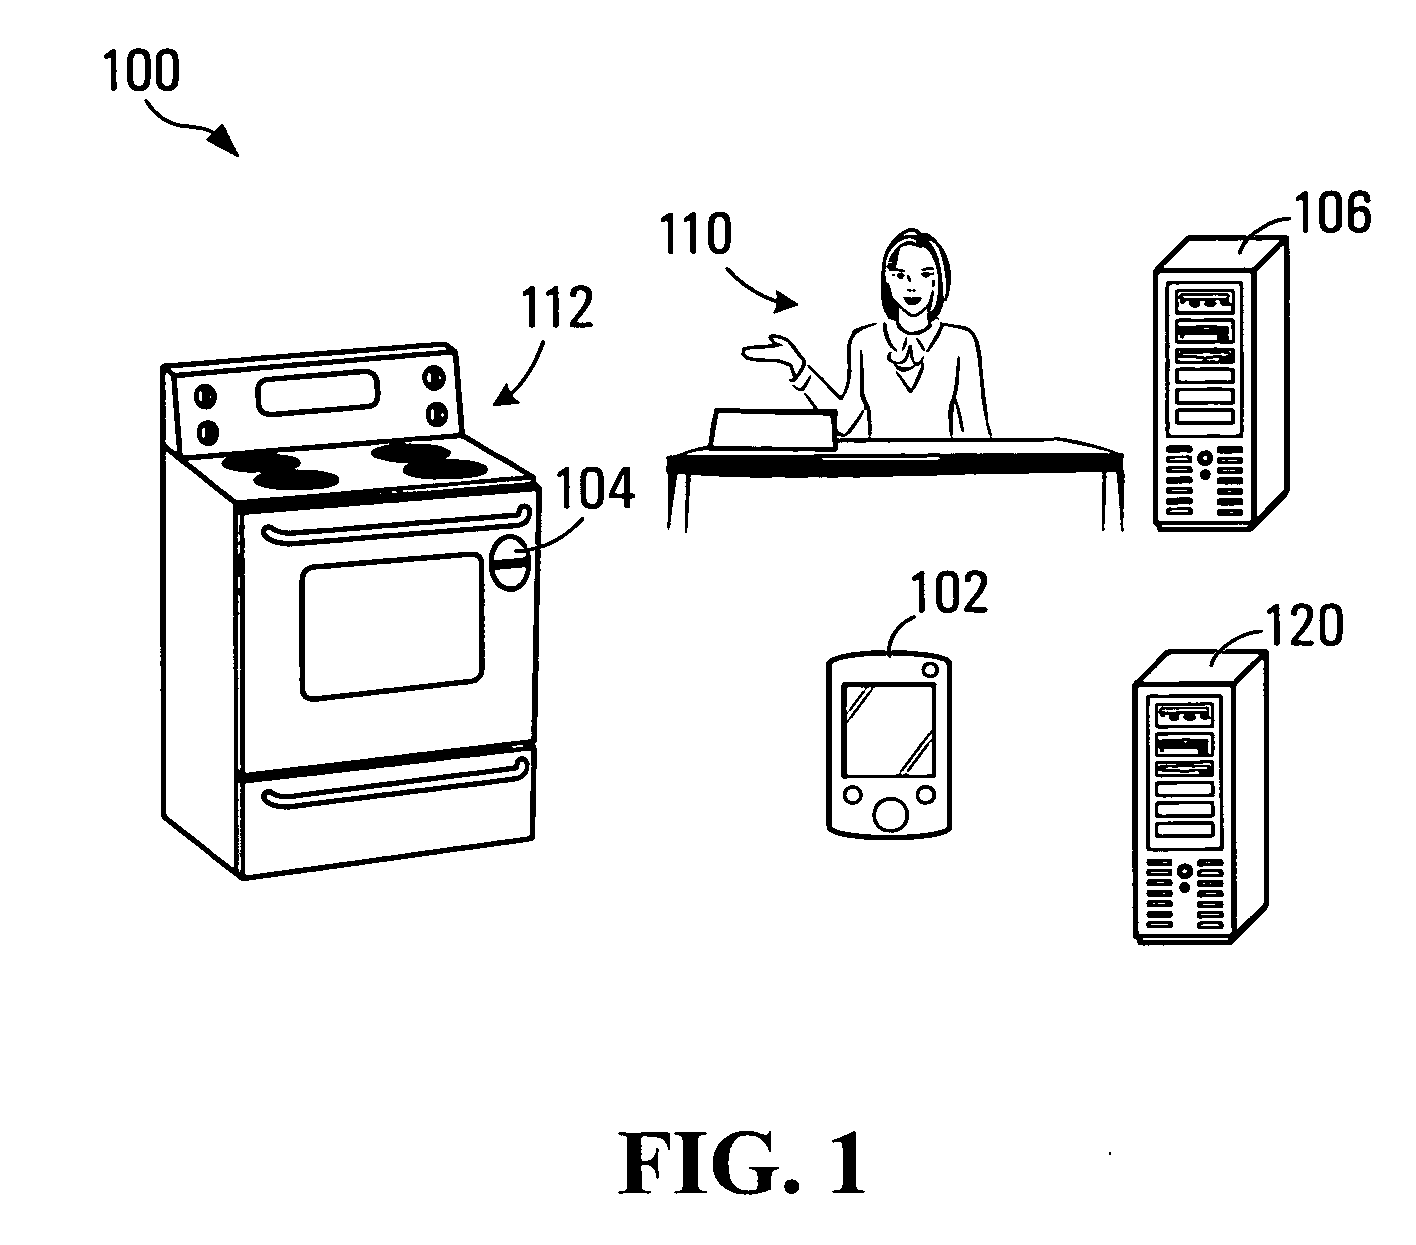 Device and method for shopping and data collection